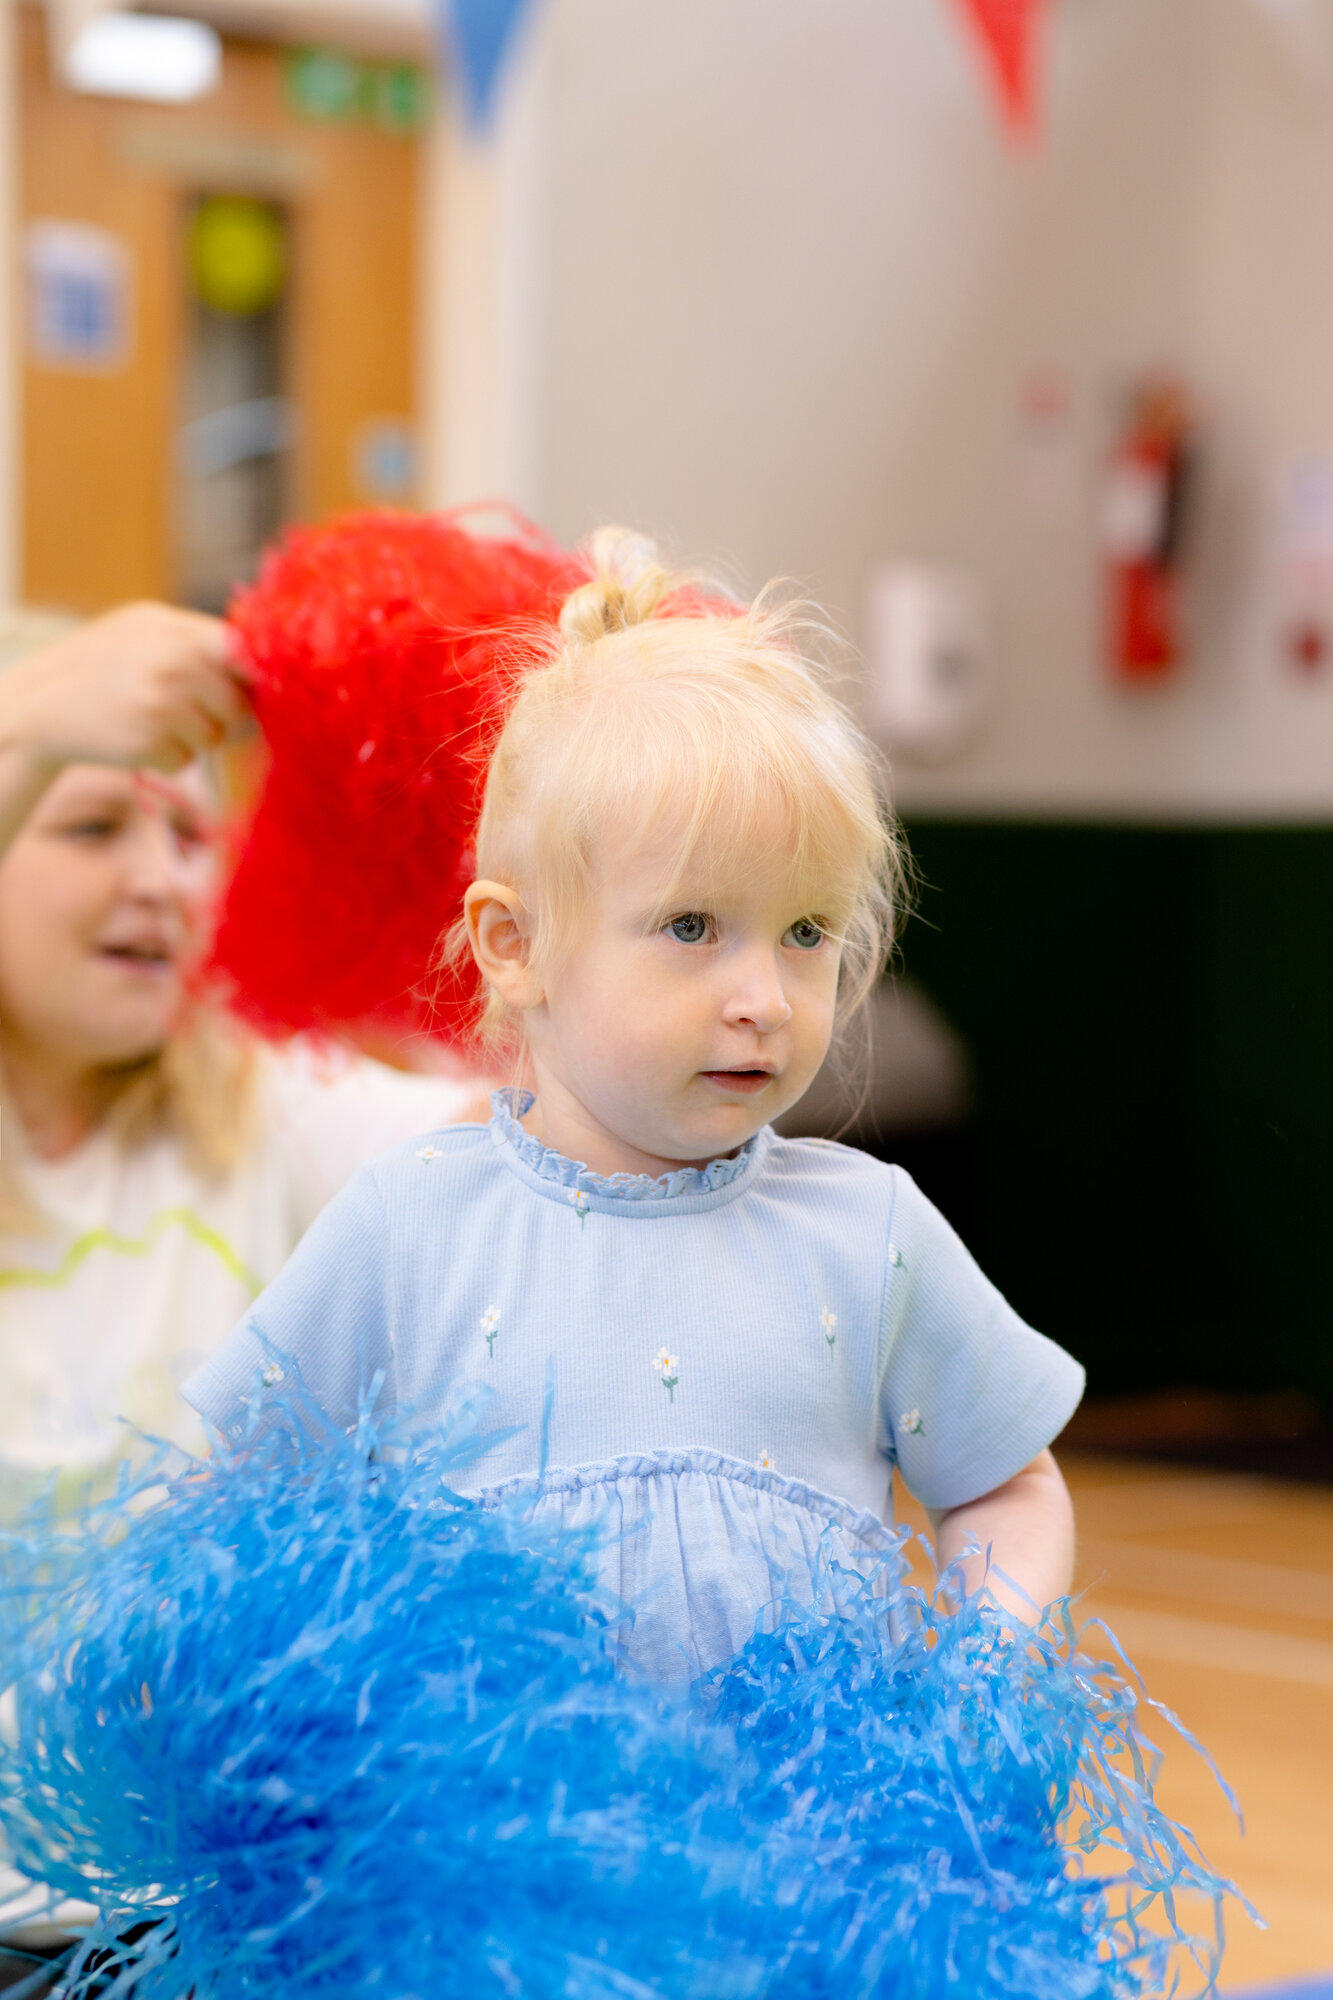 Images Bloom Toddler Classes